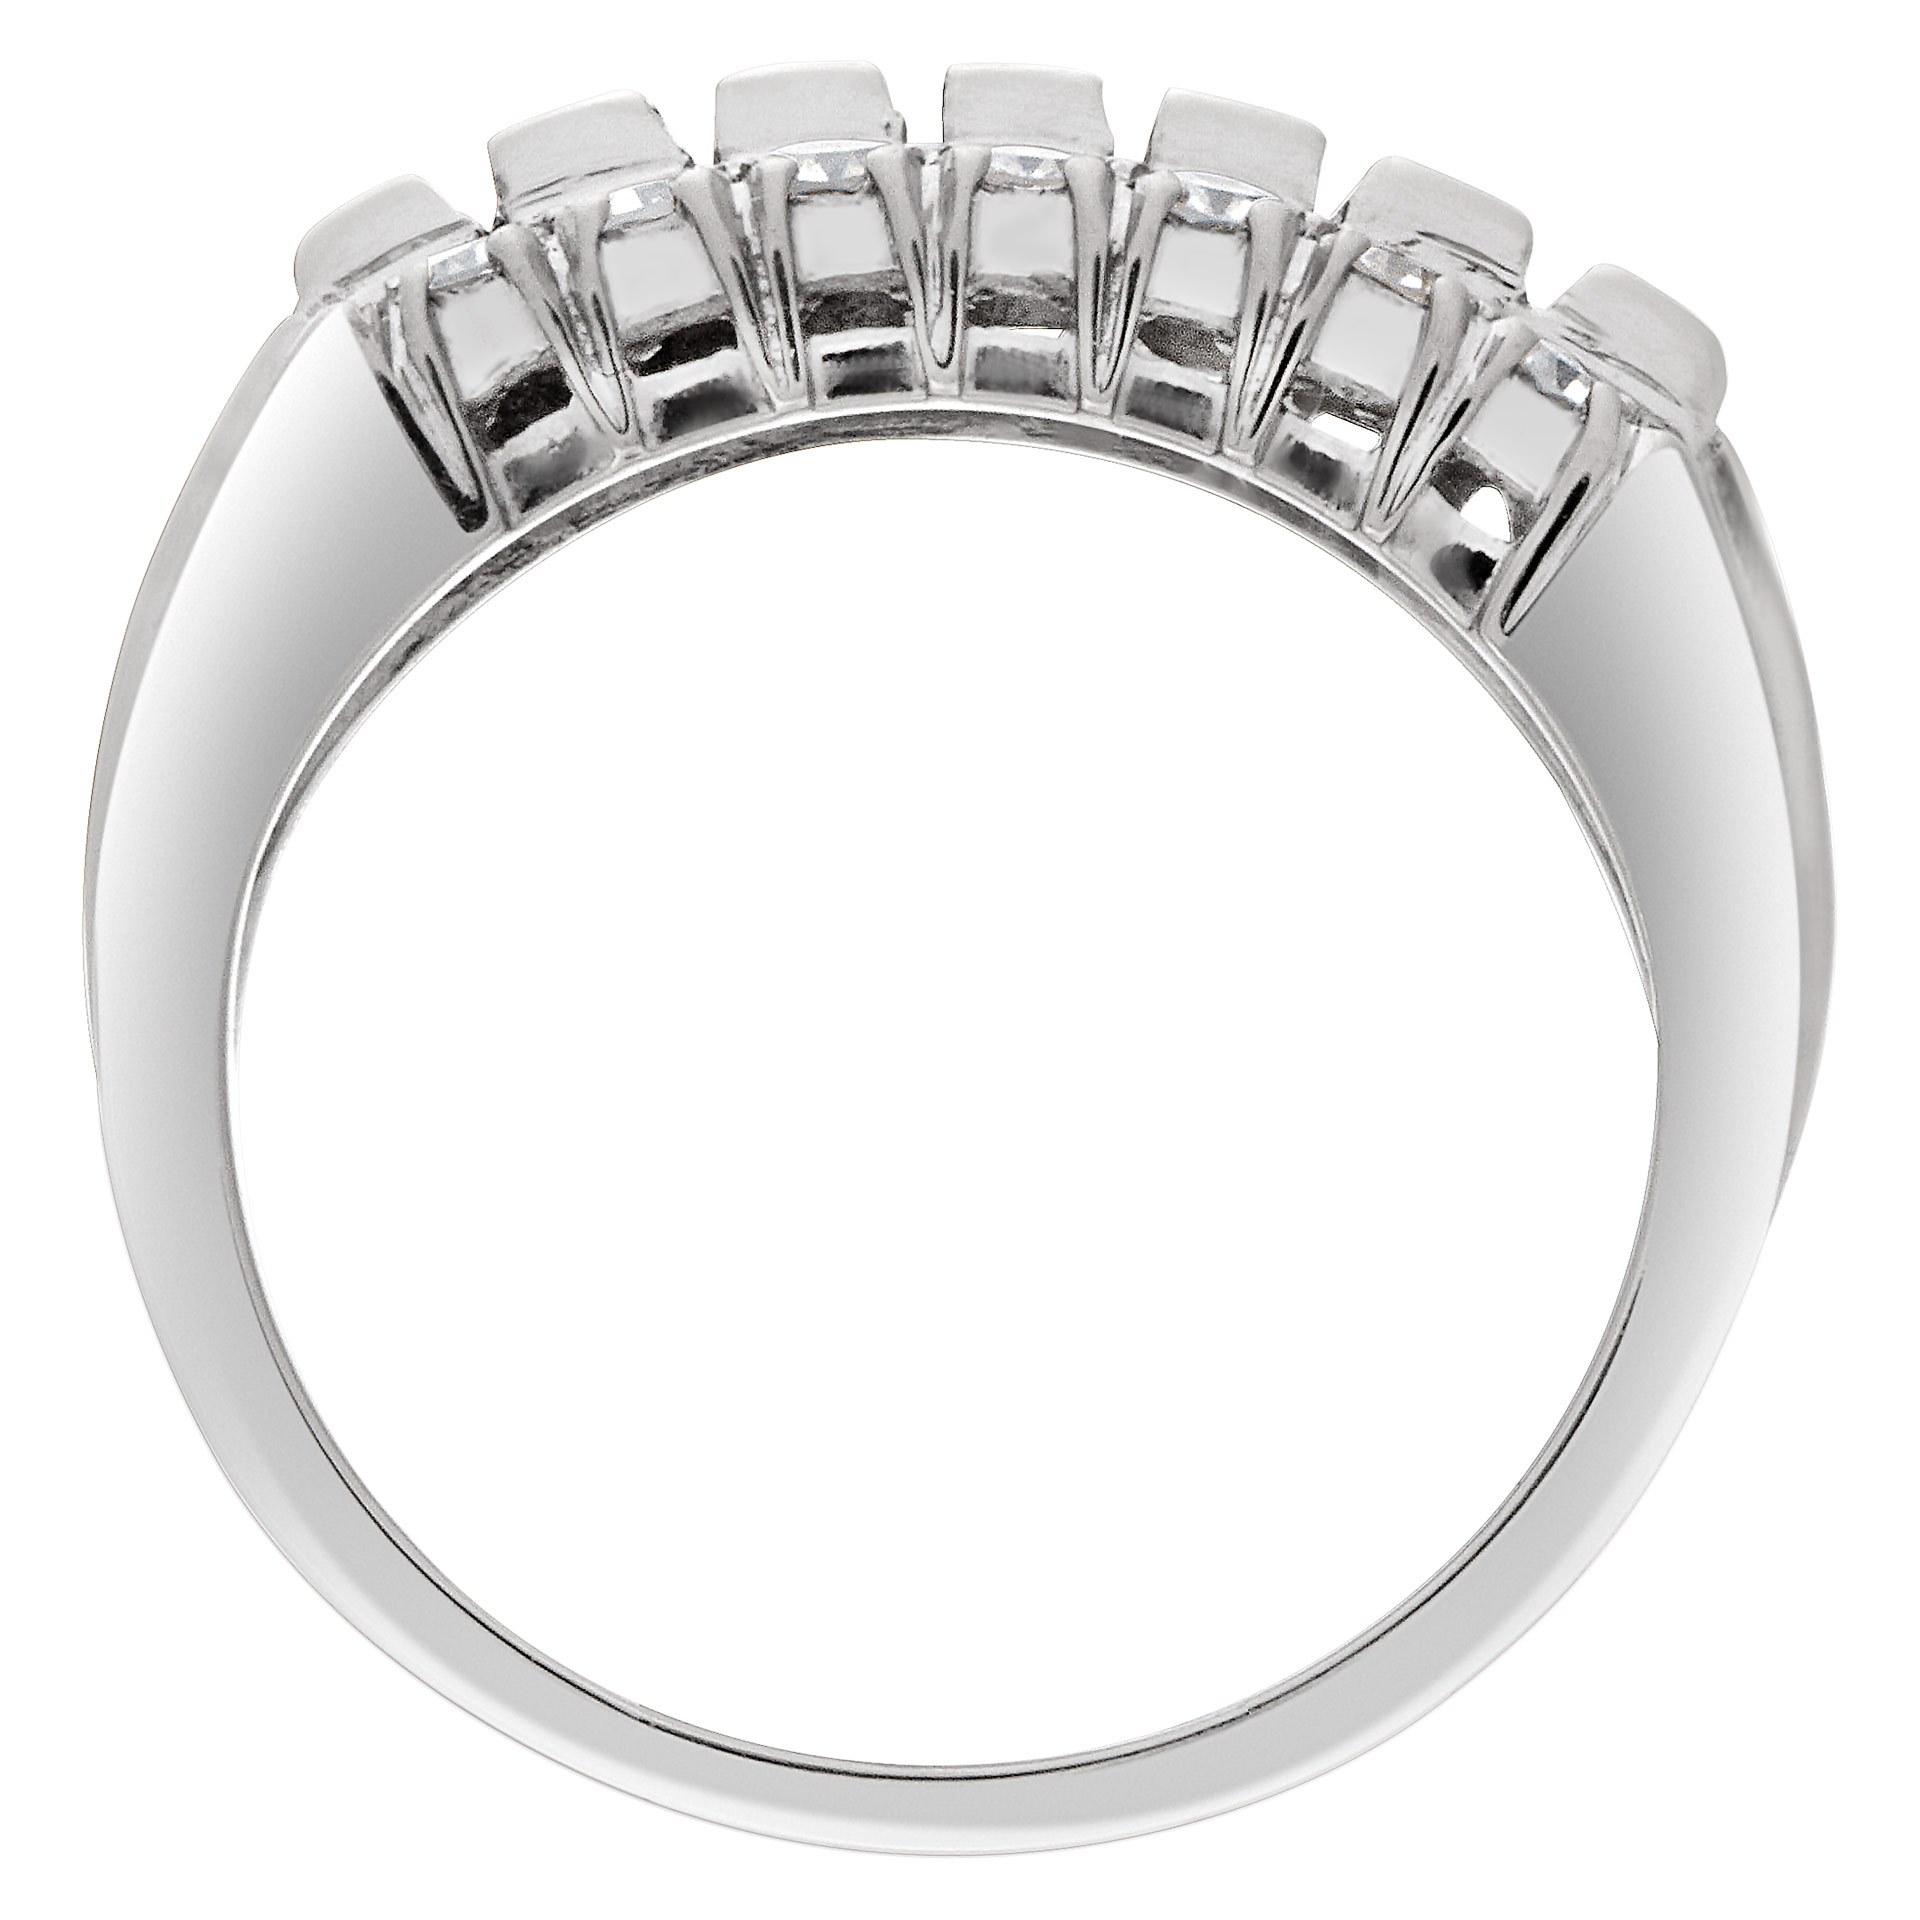 Vintage diamond pinky ring in 14k white gold with 0.65 carats in round & baguette diamonds image 4